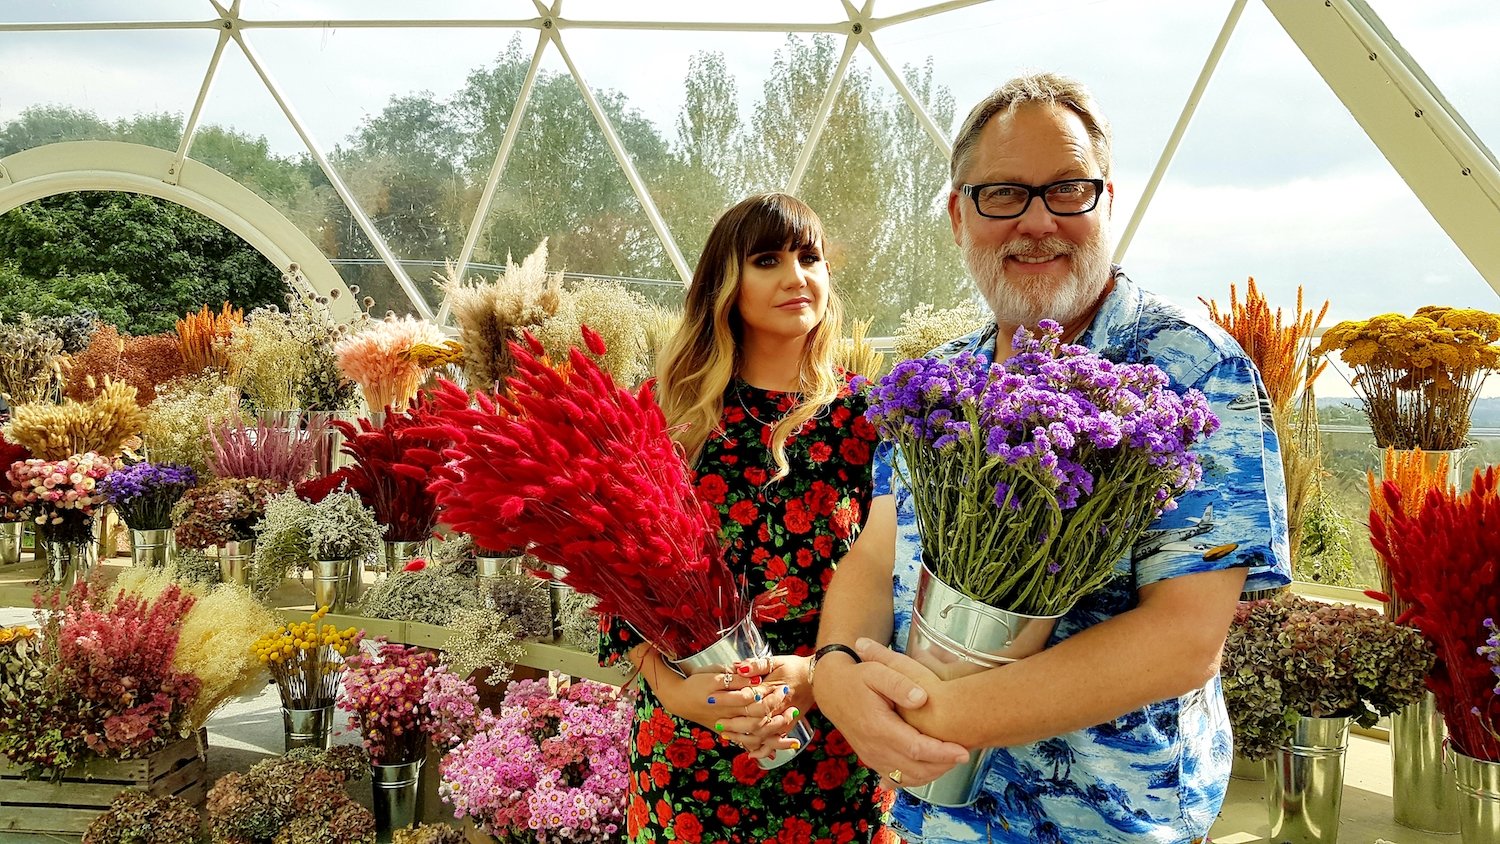 Natasia Demetriou and Vic Reeves on the Big Flower Fight 